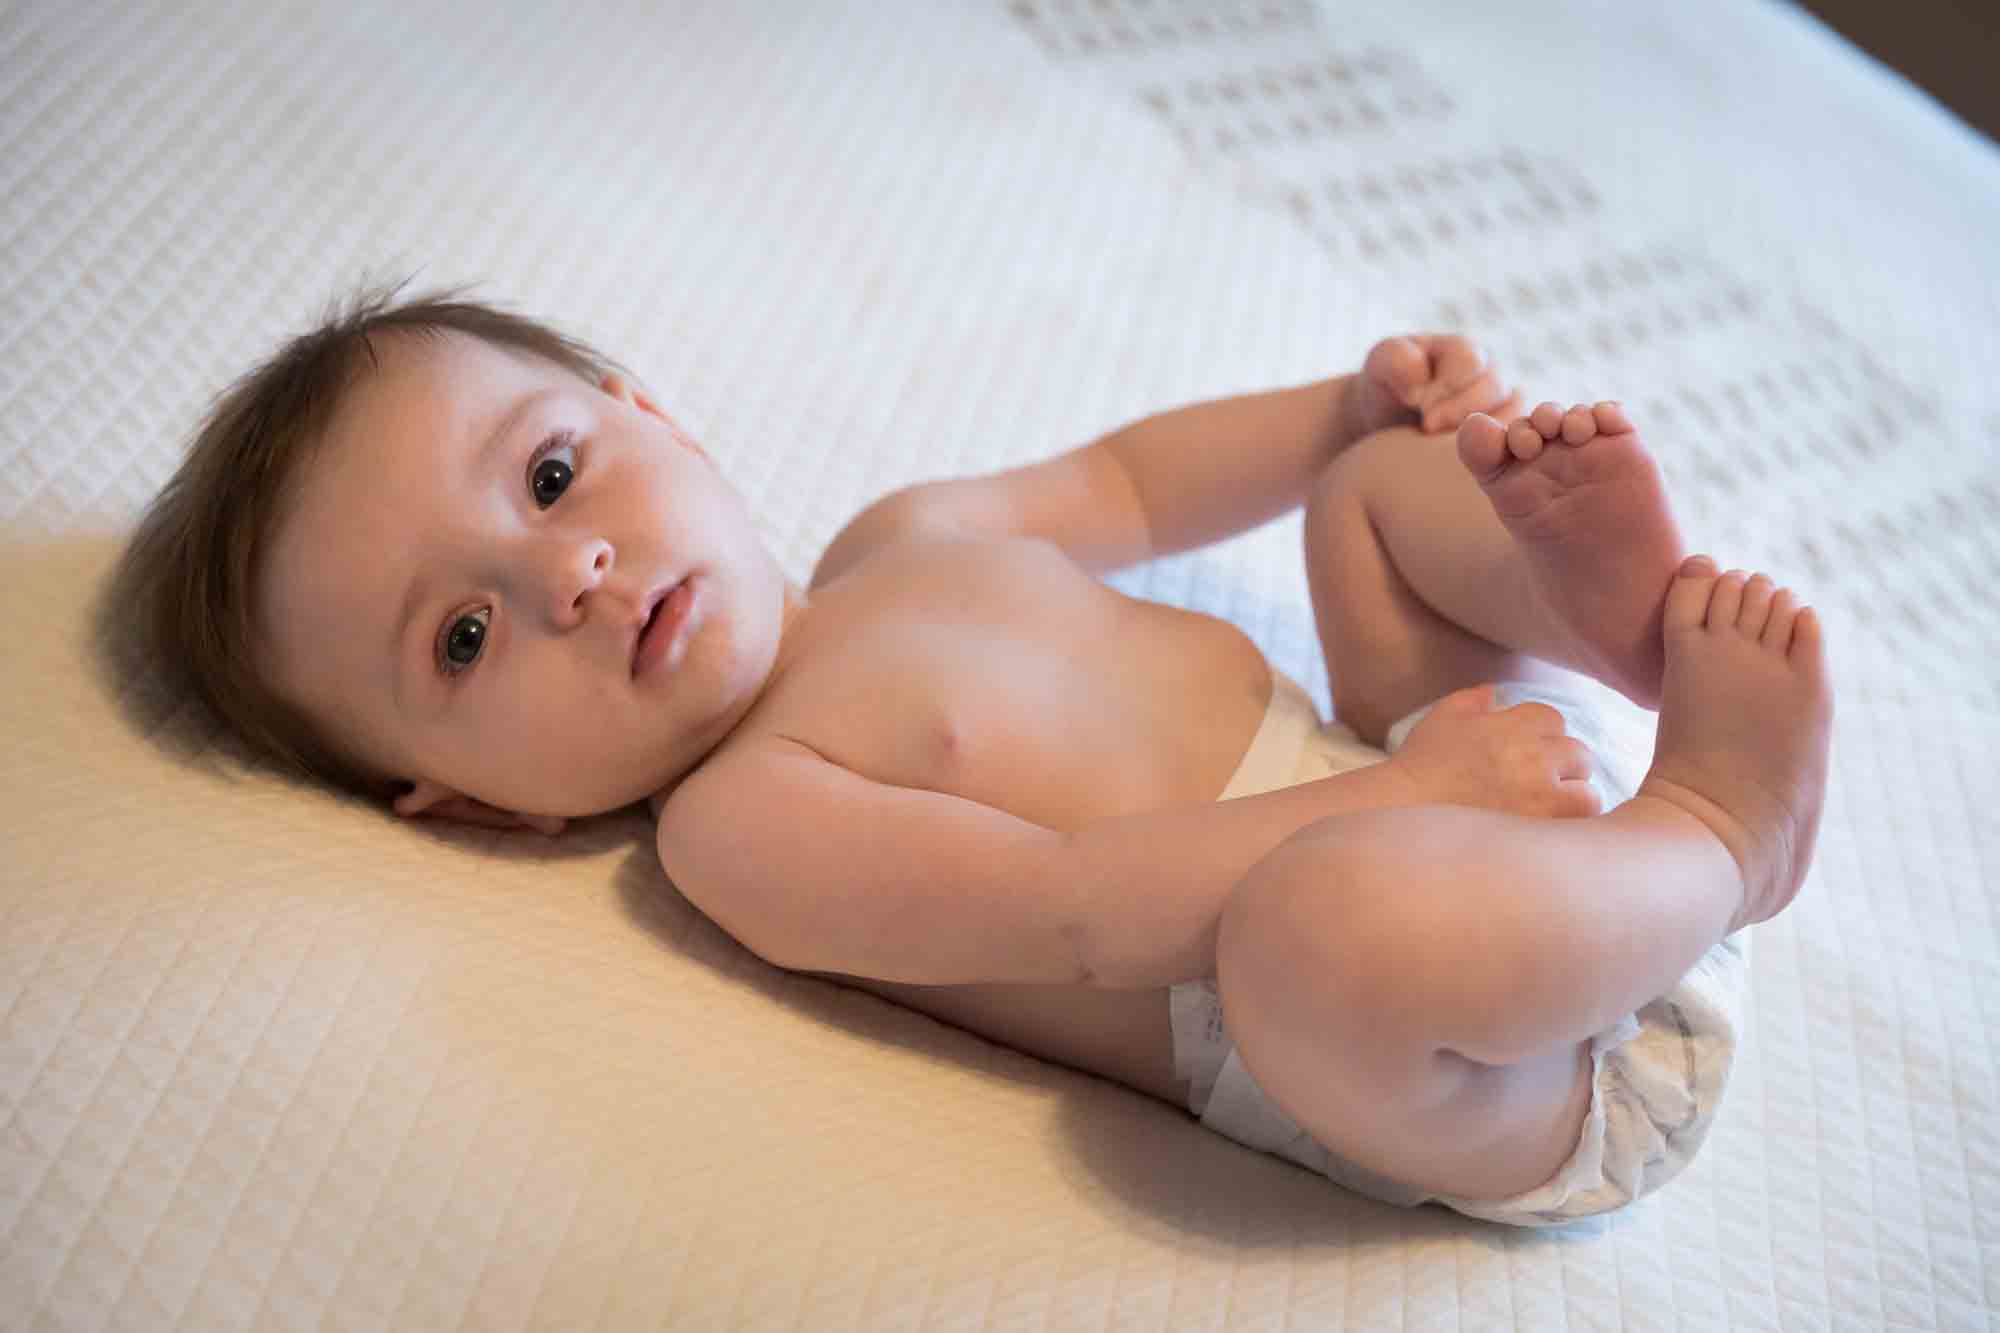 Naked baby wearing diaper on white bedspread